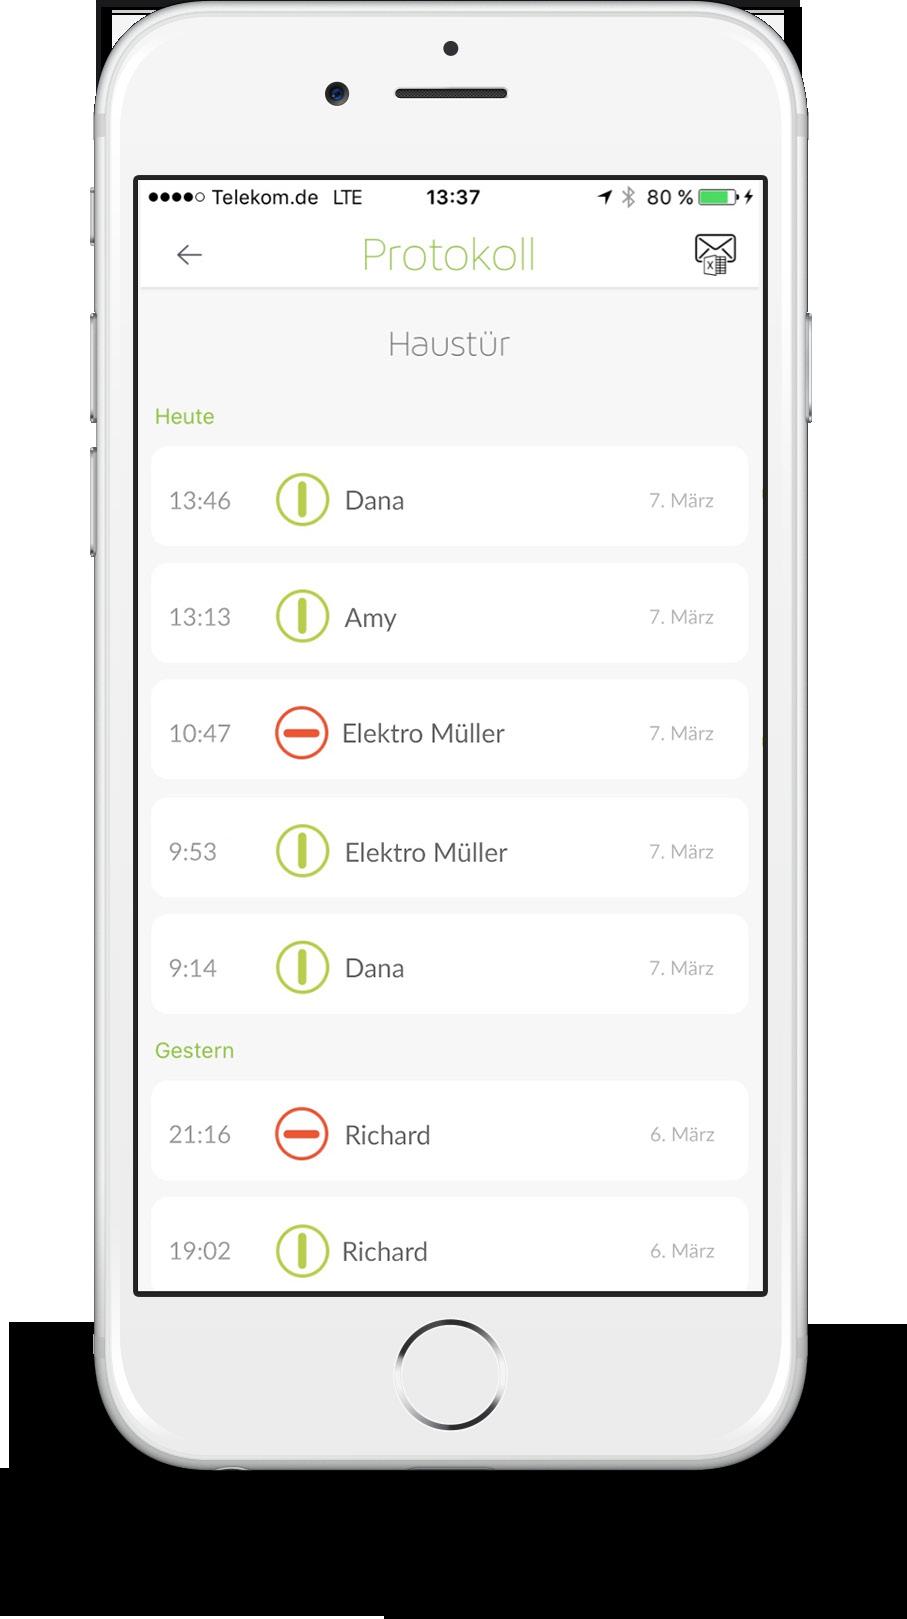 Comprehensive activity log The app provides a log that shows you which user locked or unlocked